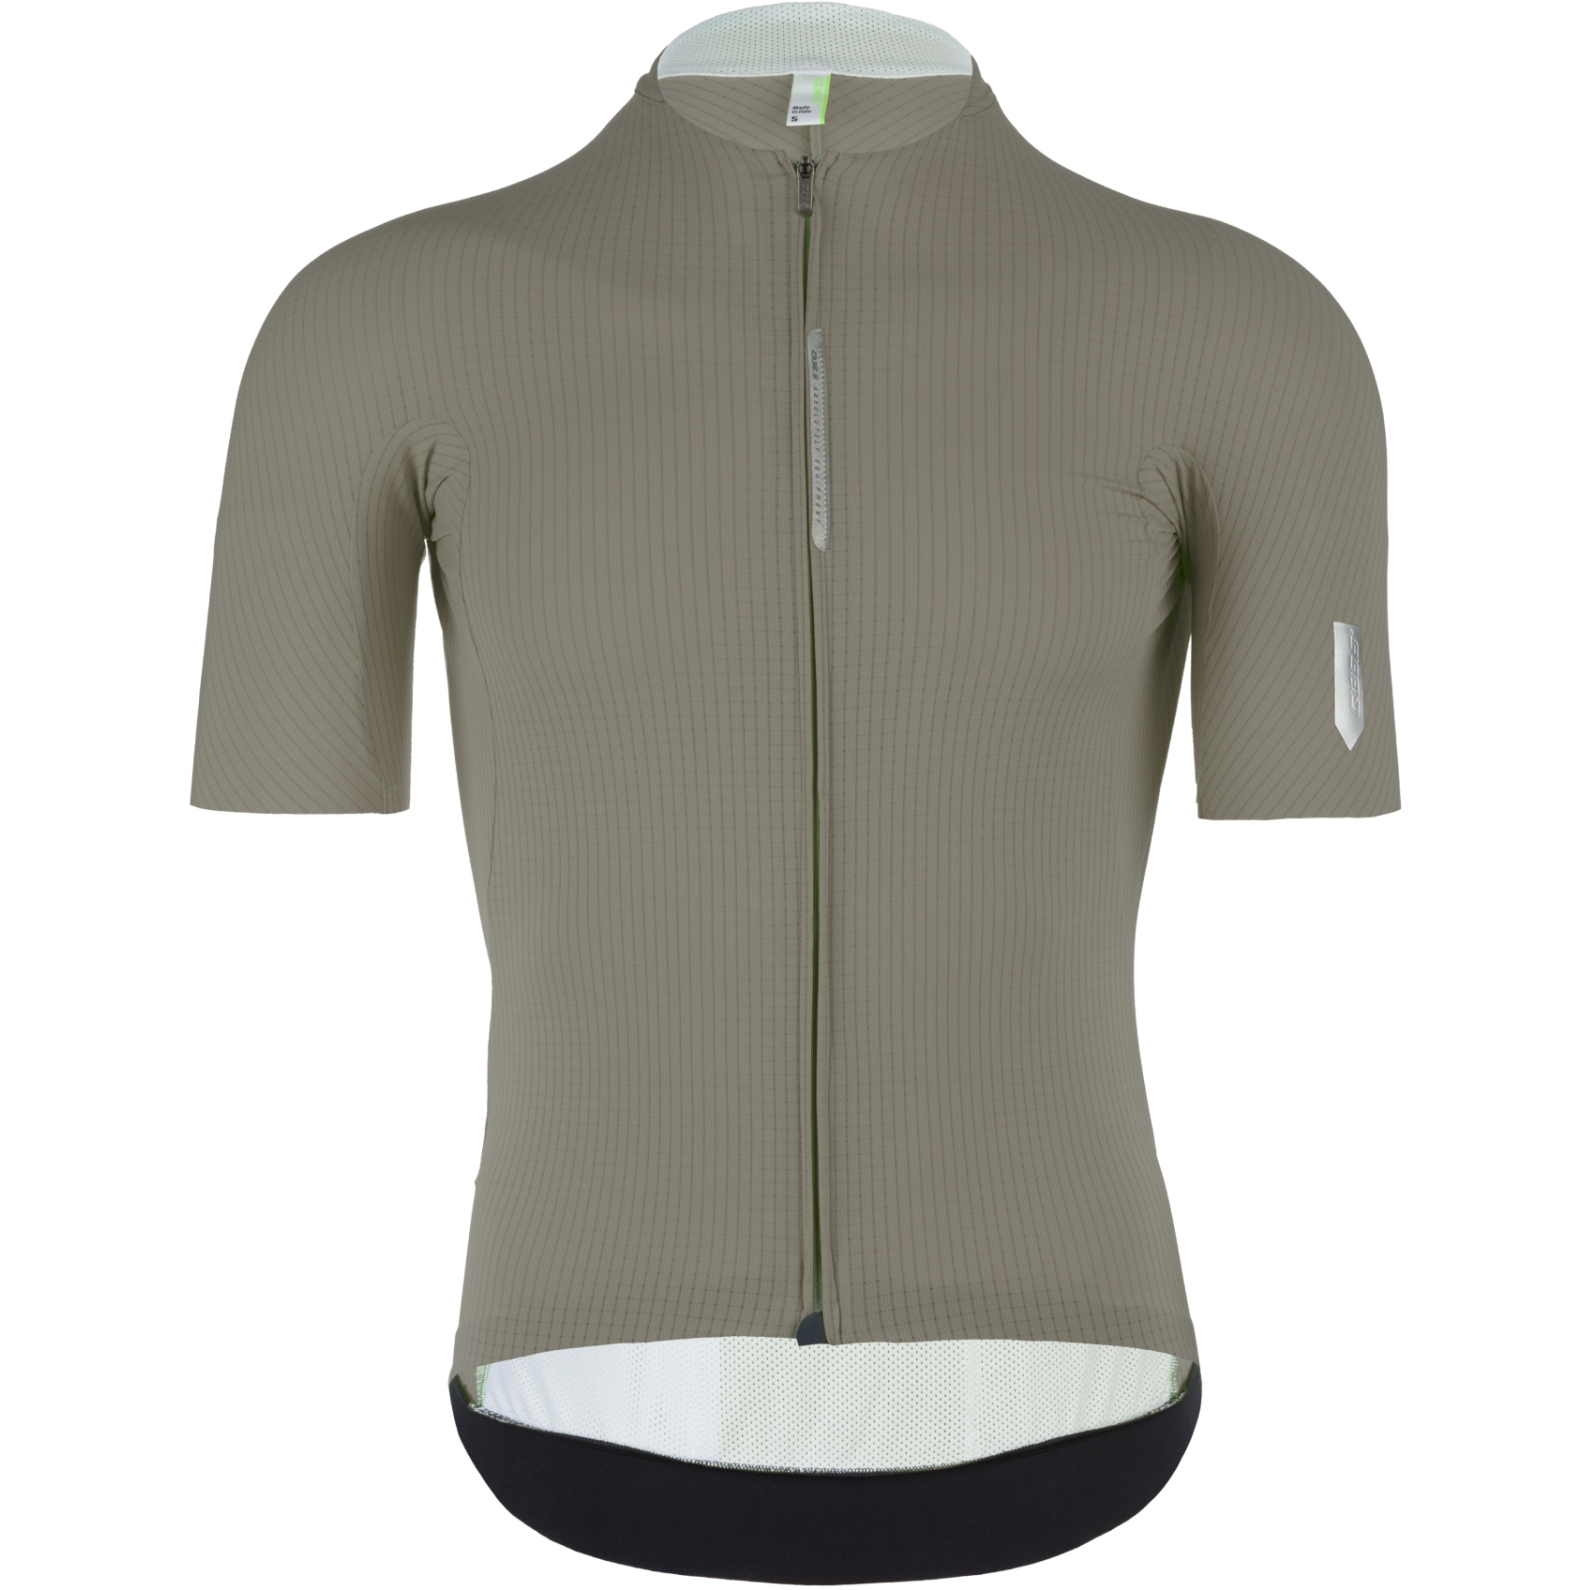 Picture of Q36.5 Pinstripe Pro Short Sleeve Jersey Men - olive green